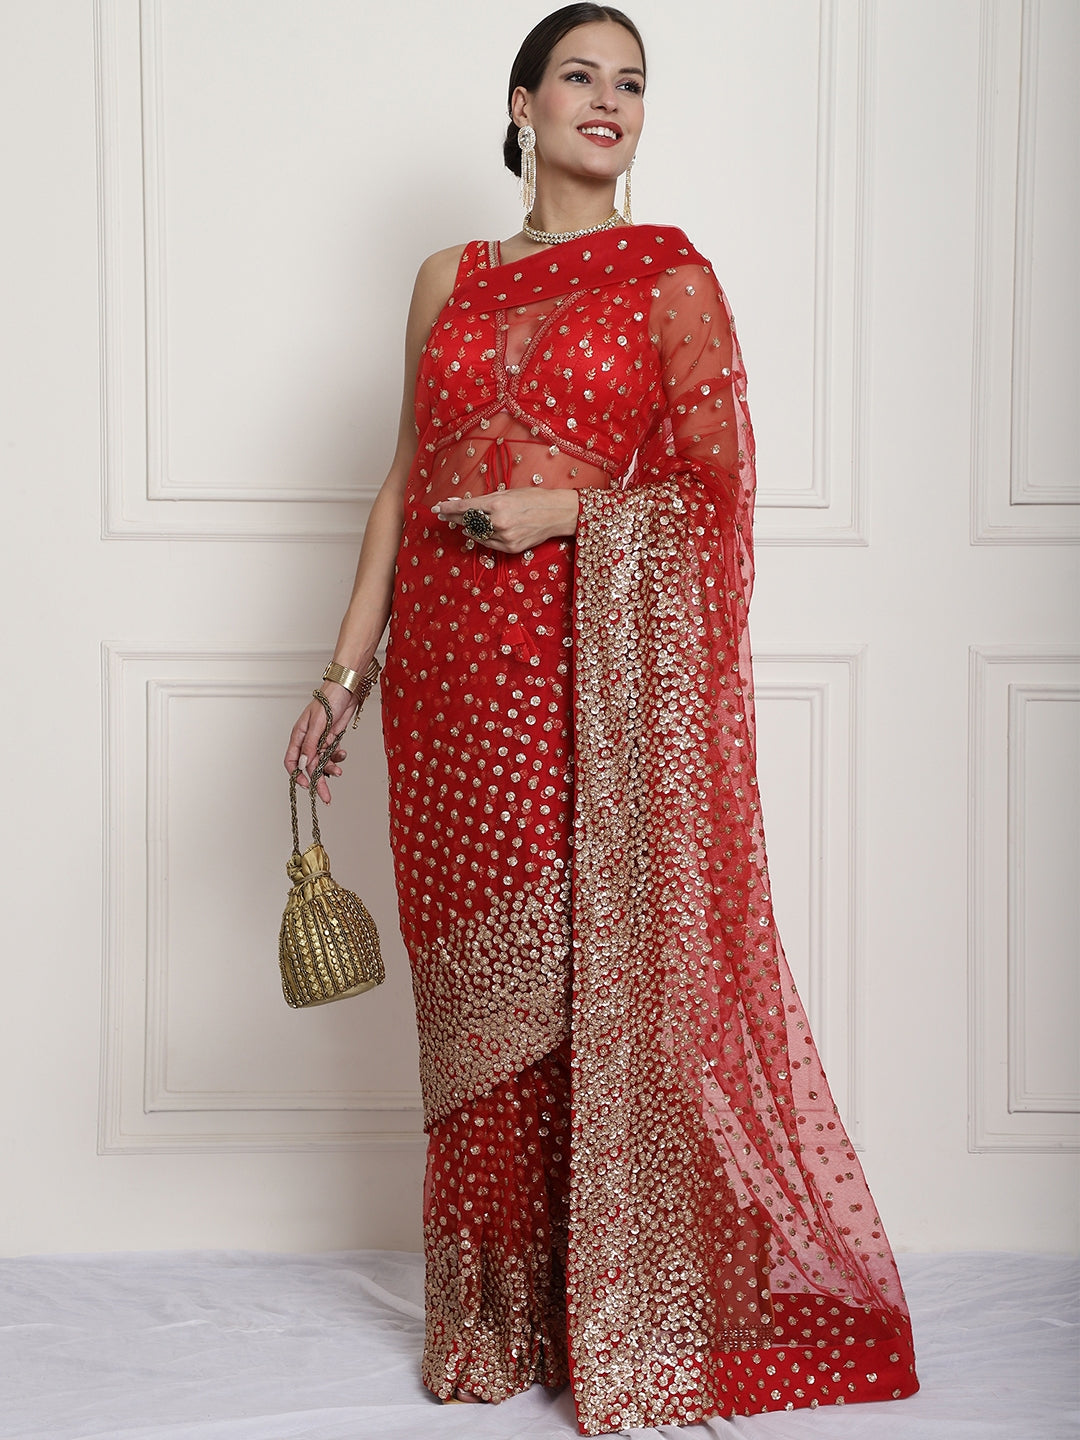 Stitched Saree - Buy Pre-Stitched Sarees Online in India | Myntra